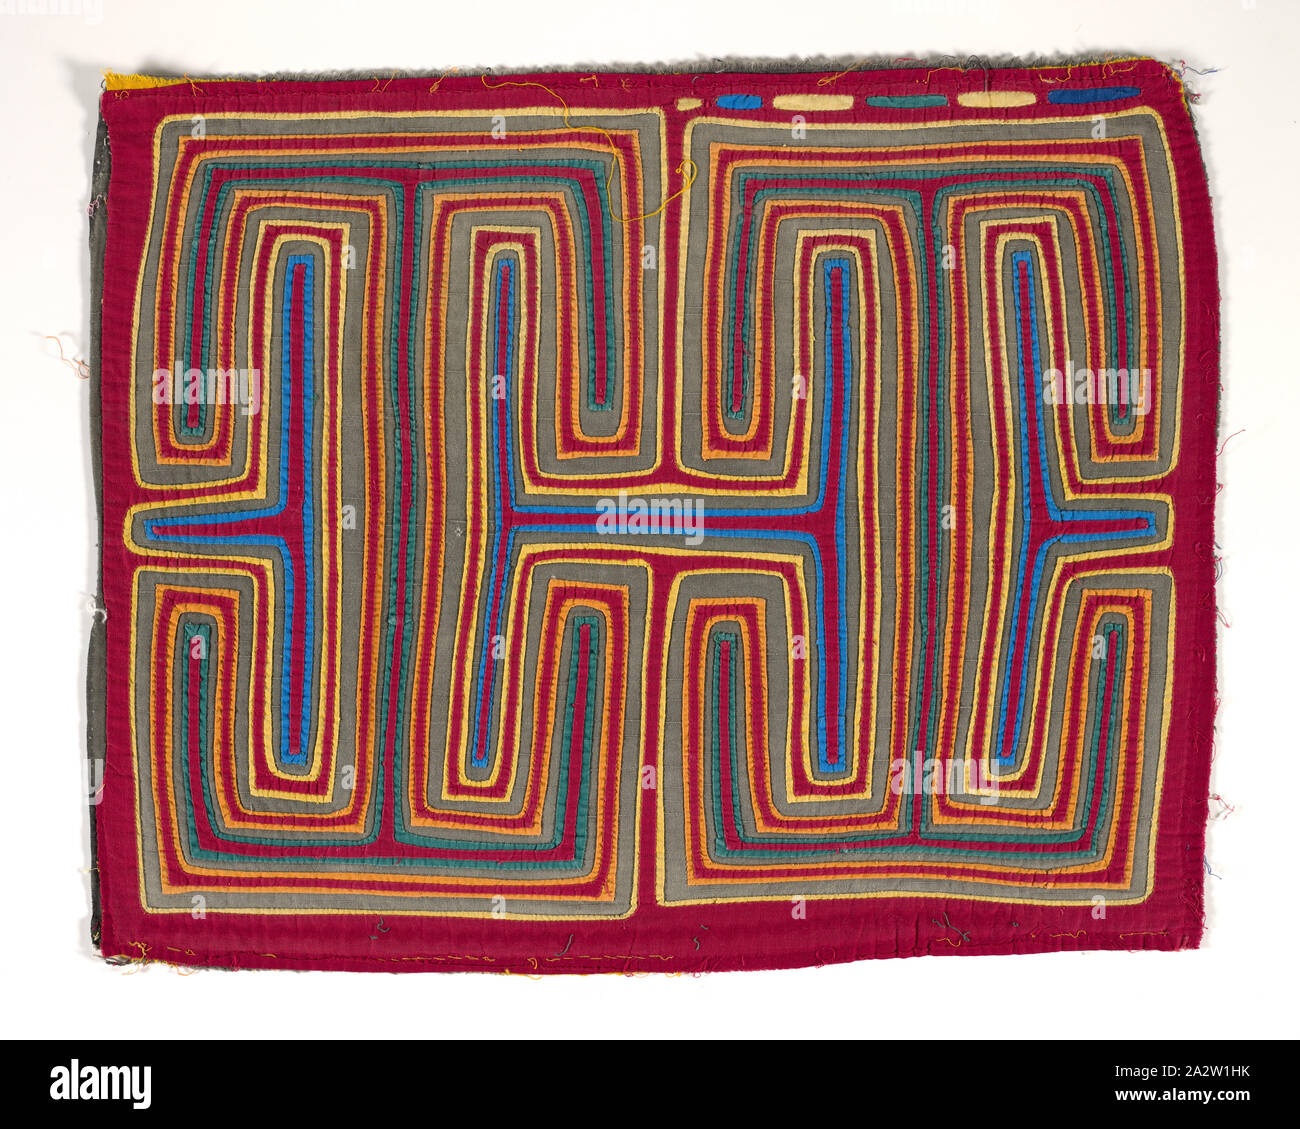 shirt panel (mola), Kuna people, about 1950s, appliqued cotton, 16-3/4 x 20-7/8 in., Textile and Fashion Arts Stock Photo